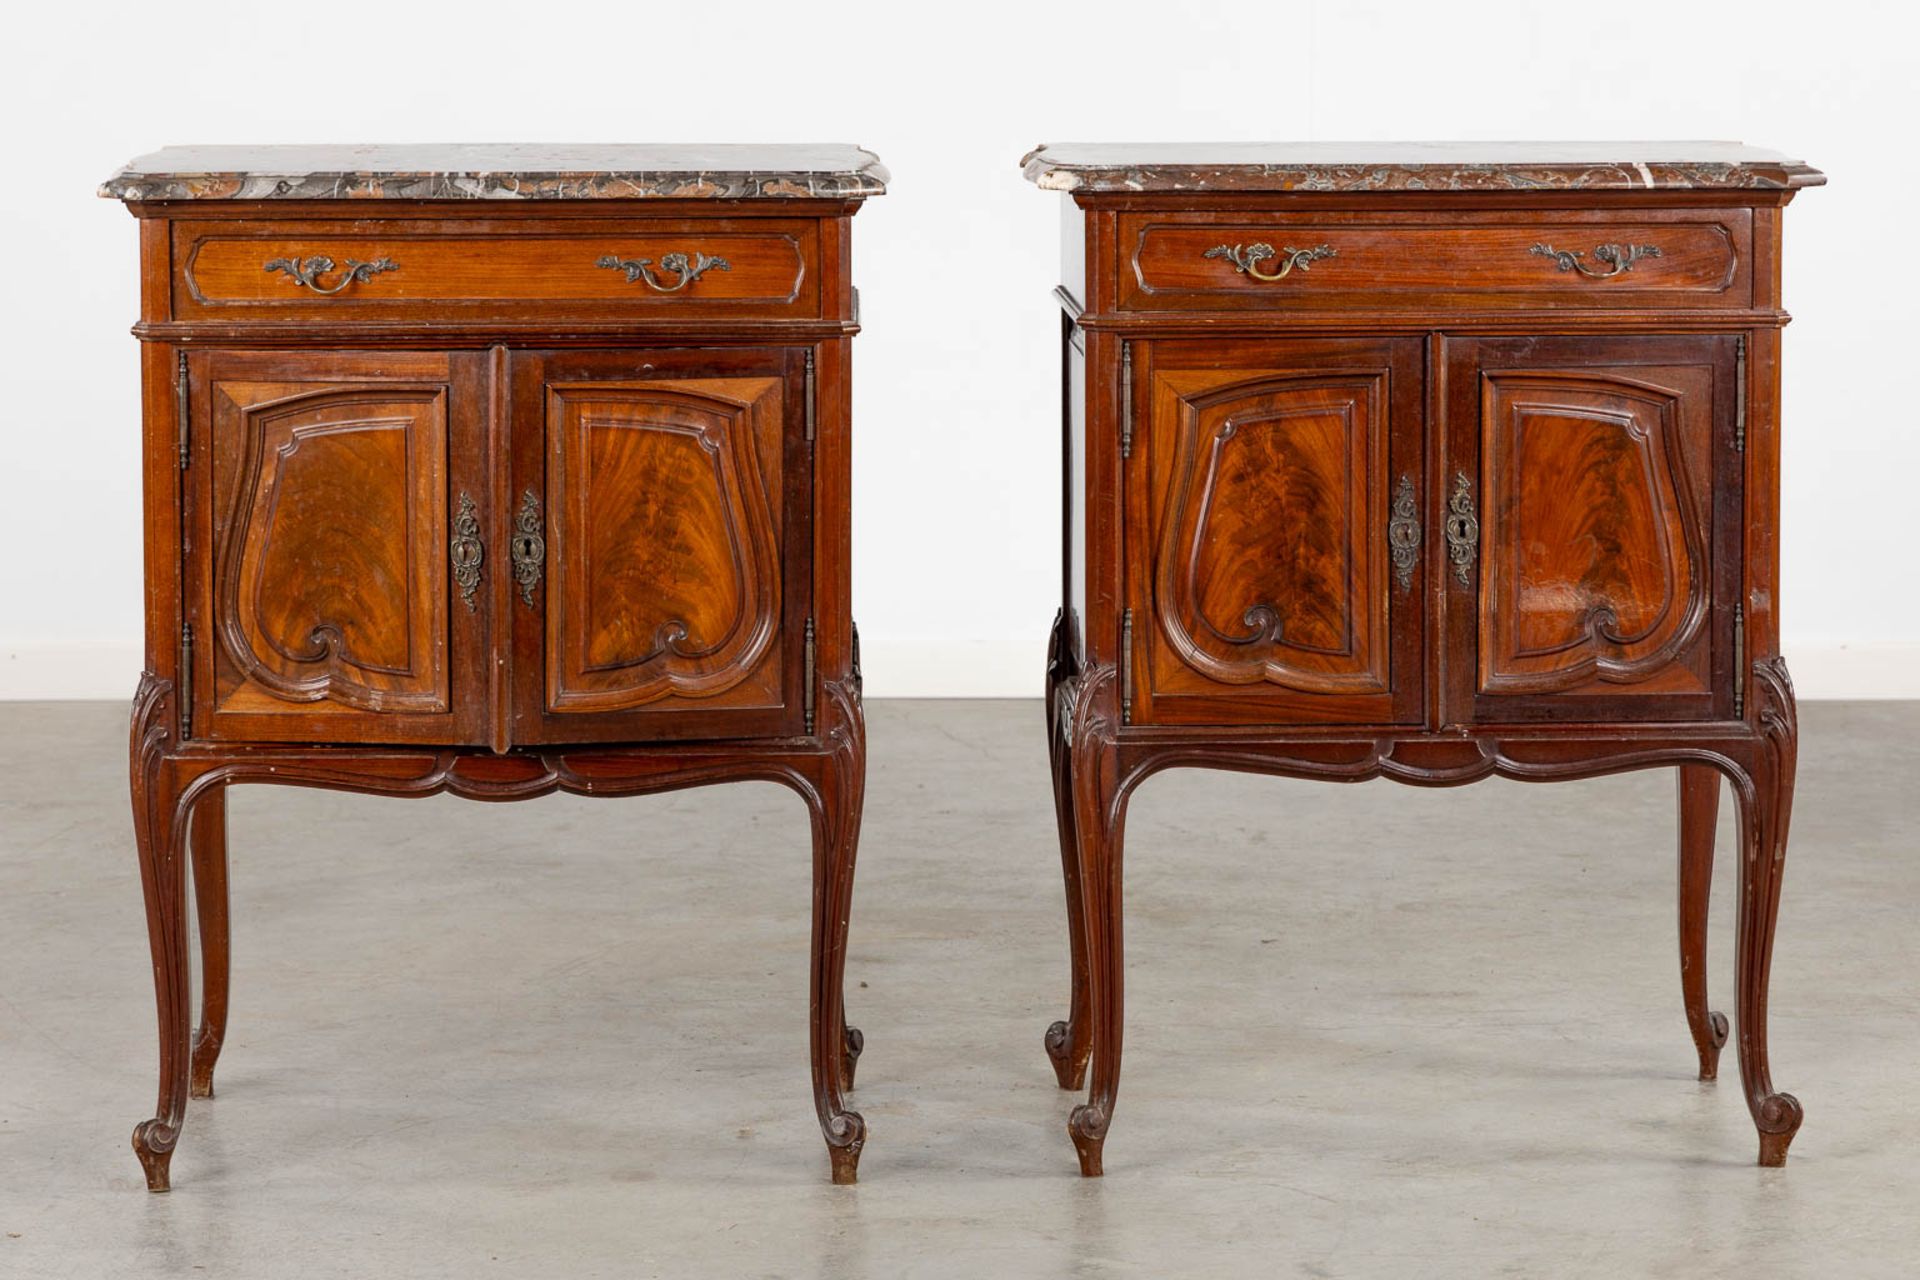 A pair of sculptured mahogany cabinets with a marble top, Louis XV style. (L:41 x W:63 x H:80 cm) - Bild 3 aus 15